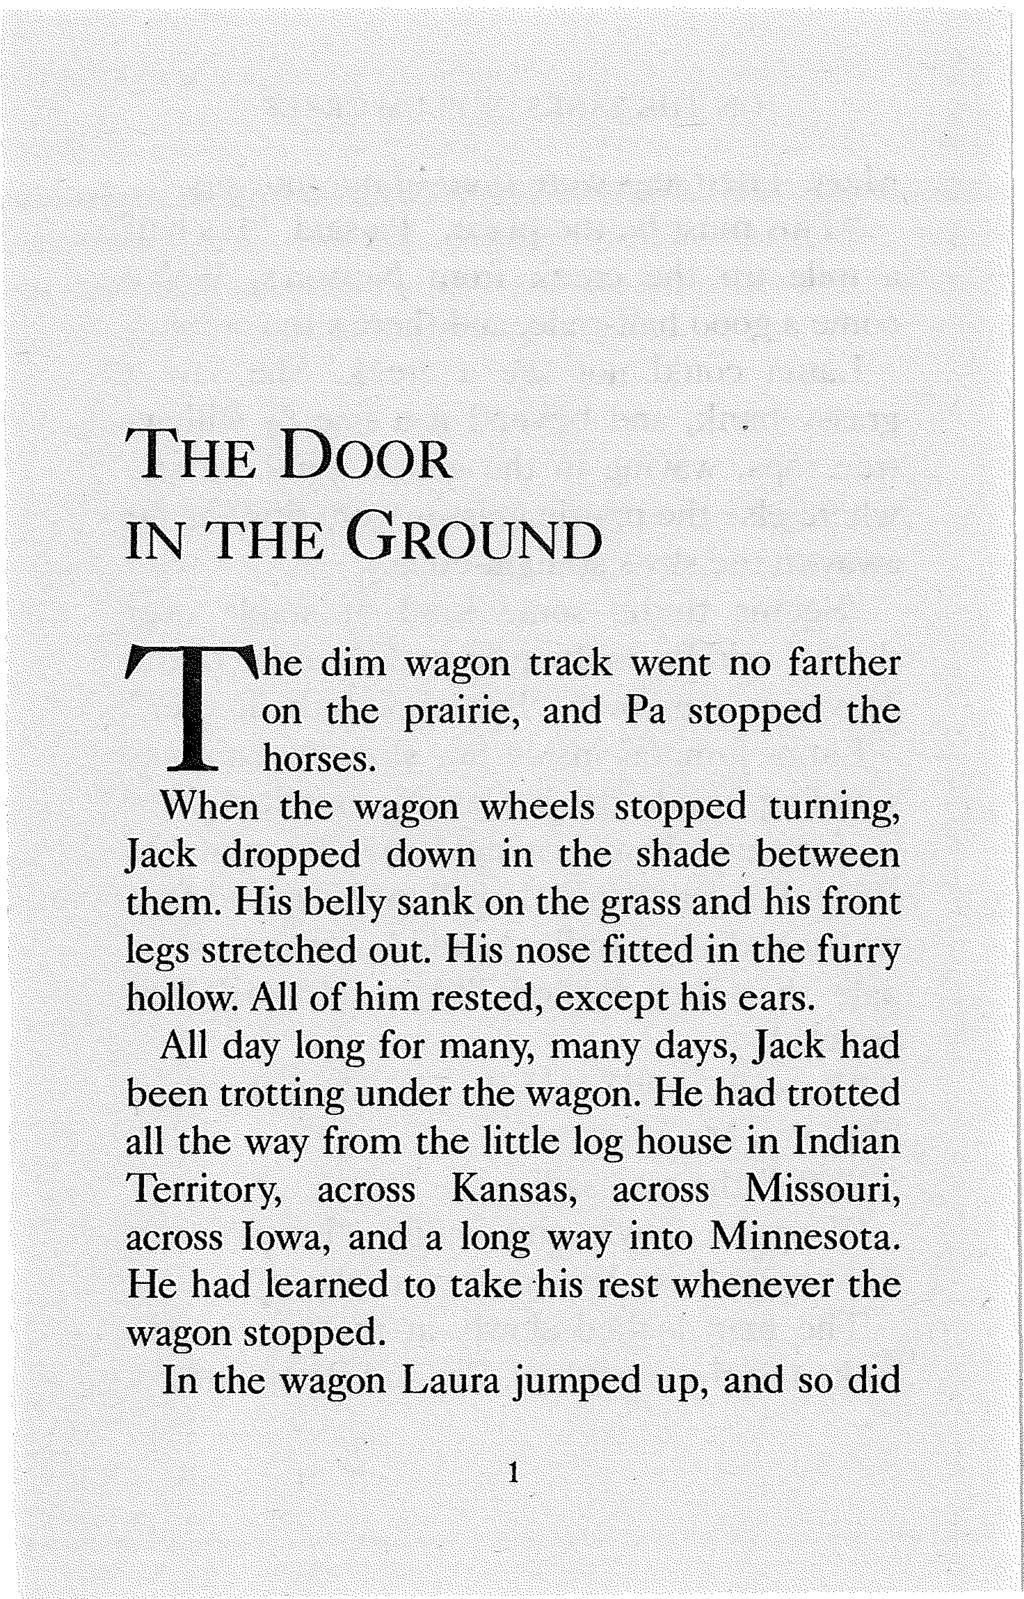 THE DOOR IN THE GROUND T he dim wagon track went no farther on the prairie, and Pa stopped the horses. When the wagon wheels stopped turning, Jack dropped down in the shade between them.